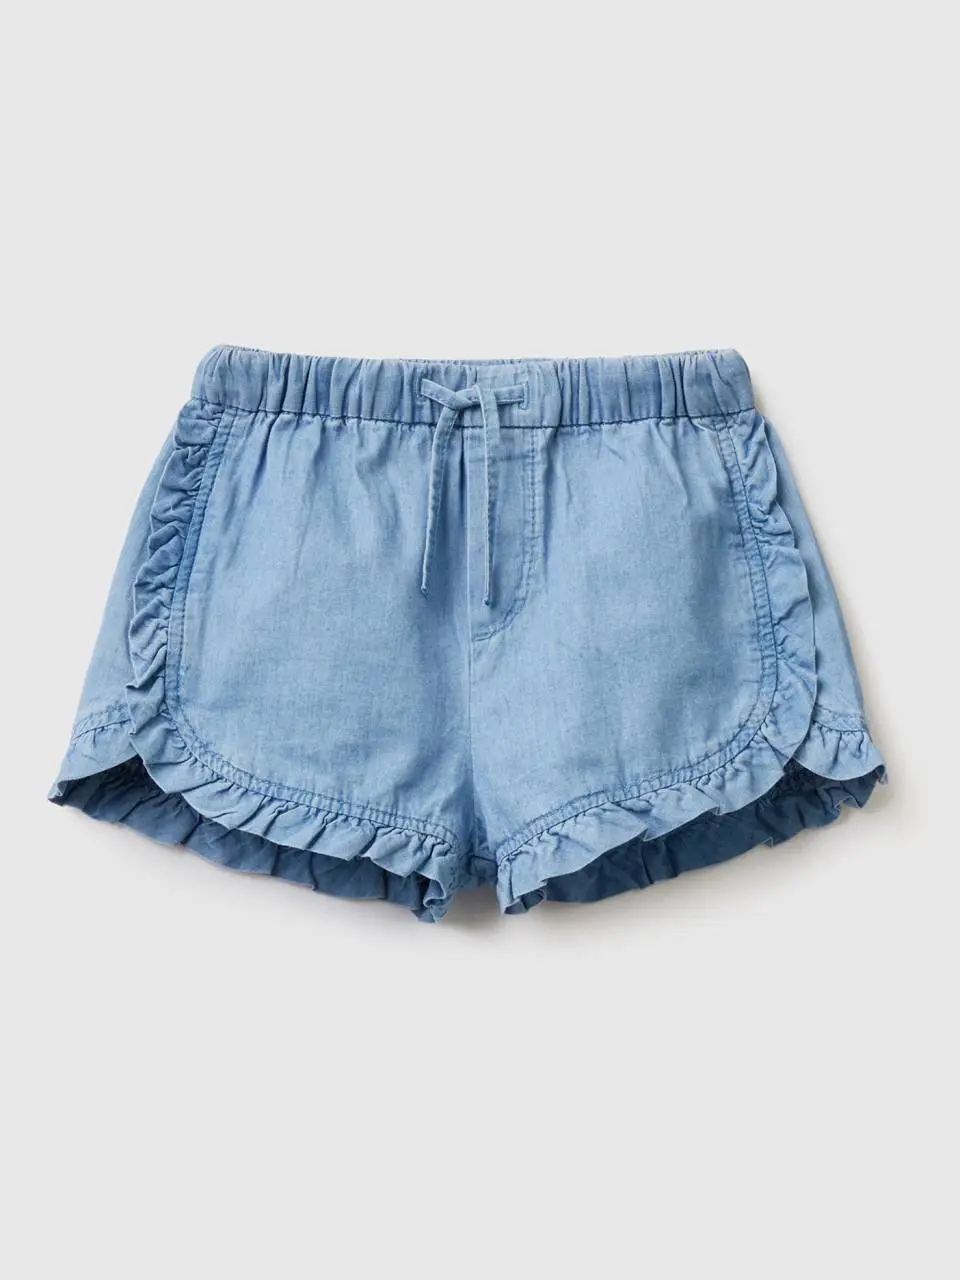 Benetton shorts in chambray with ruffles. 1